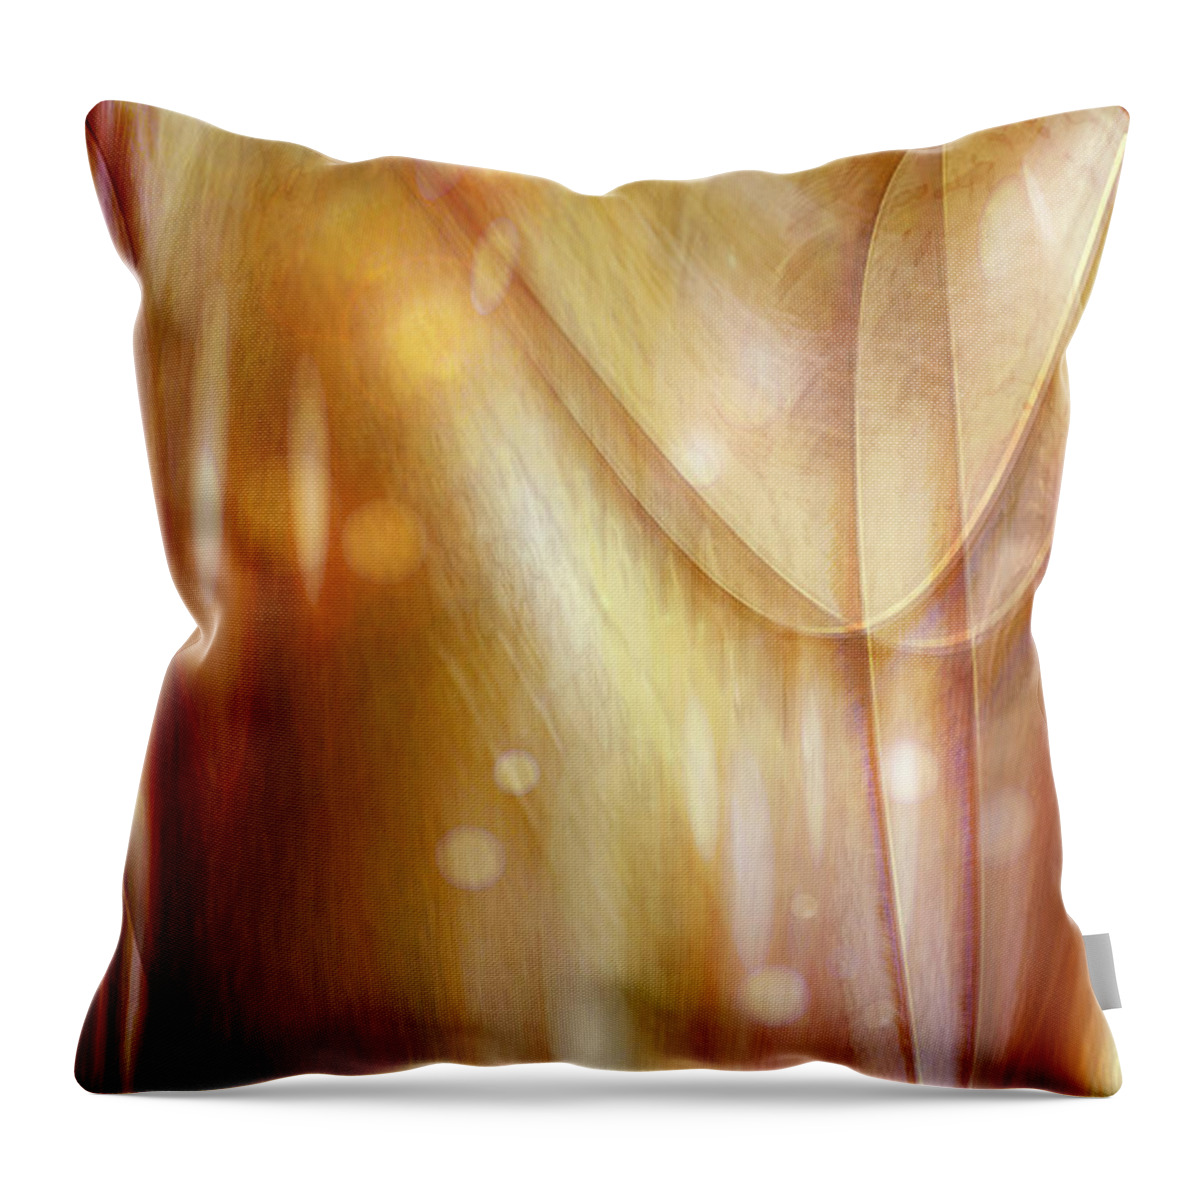 Abstract Art Throw Pillow featuring the digital art Points of light by Linda Sannuti